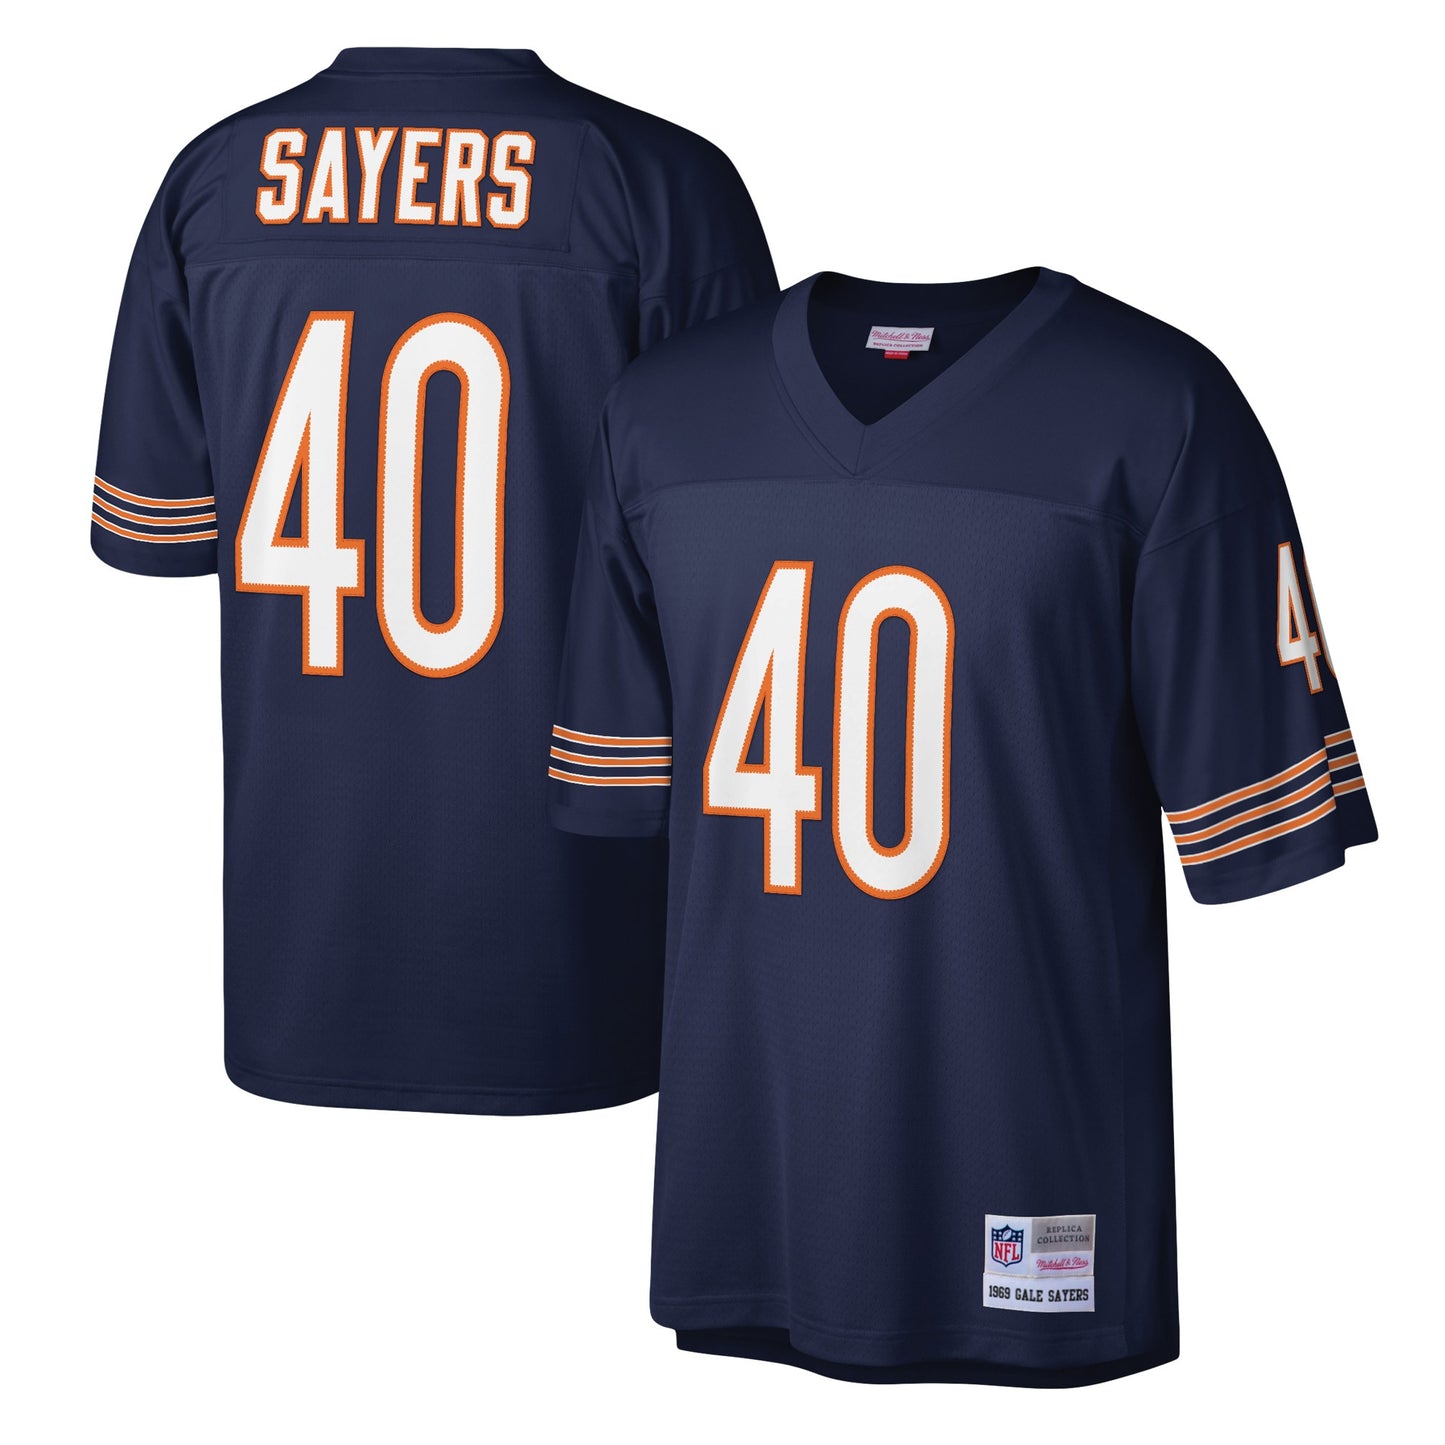 Gale Sayers Chicago Bears Mitchell & Ness Legacy Replica Jersey - Navy